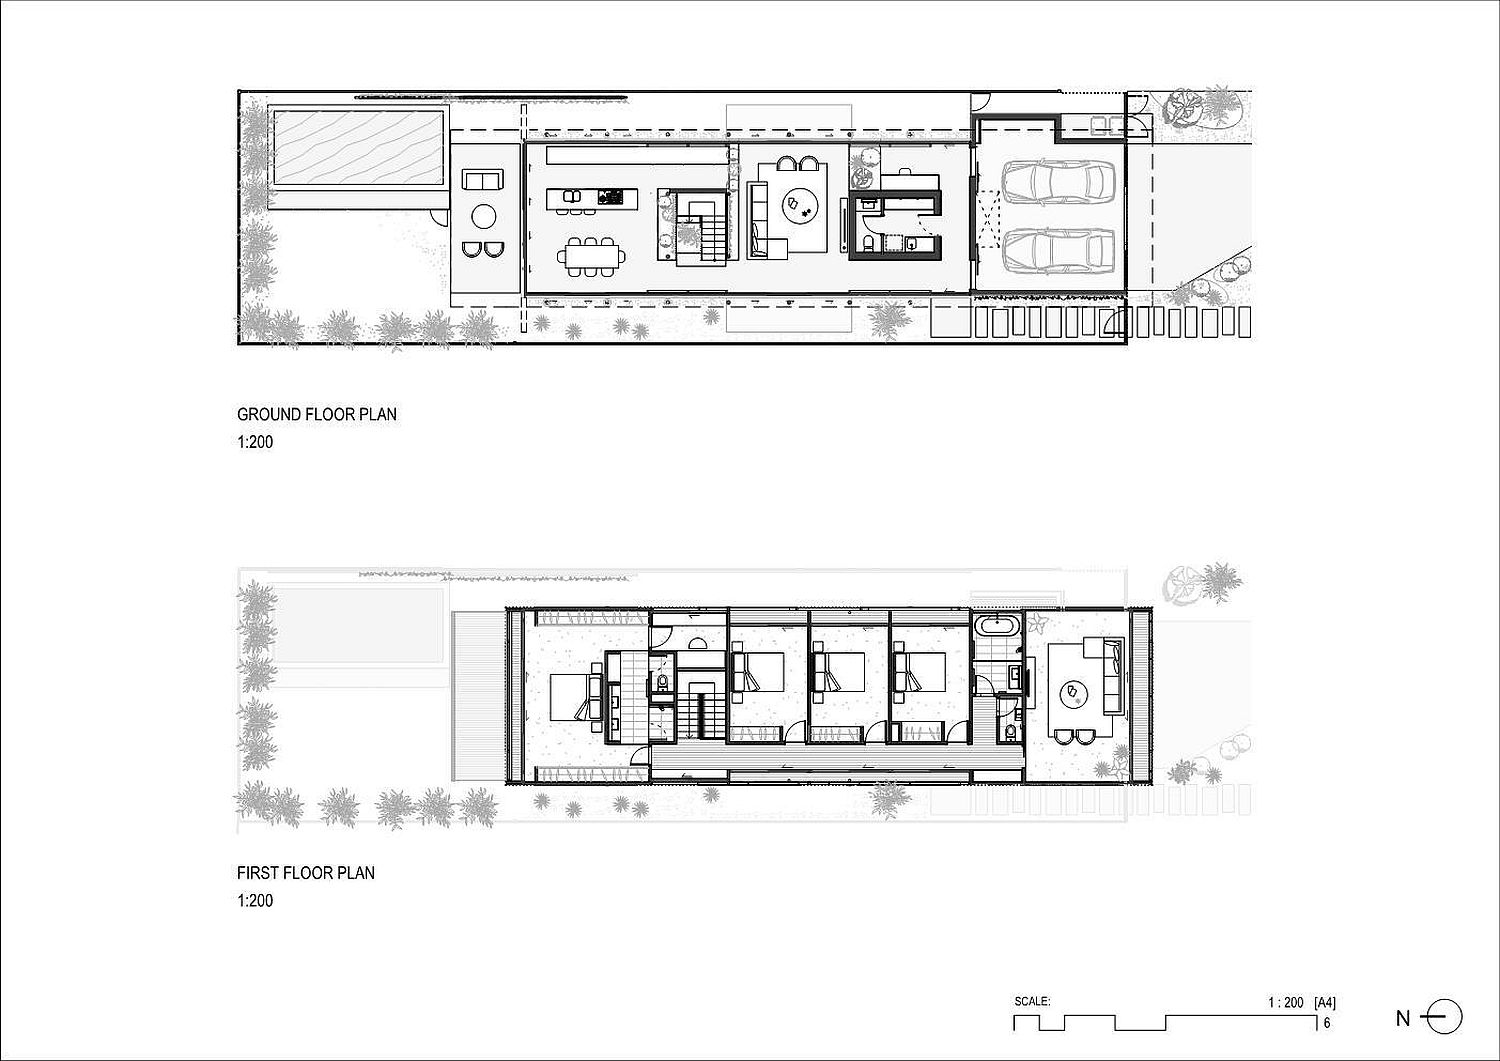 Floor-plan-of-the-house-with-public-areas-on-lower-level-and-bedrooms-on-upper-level